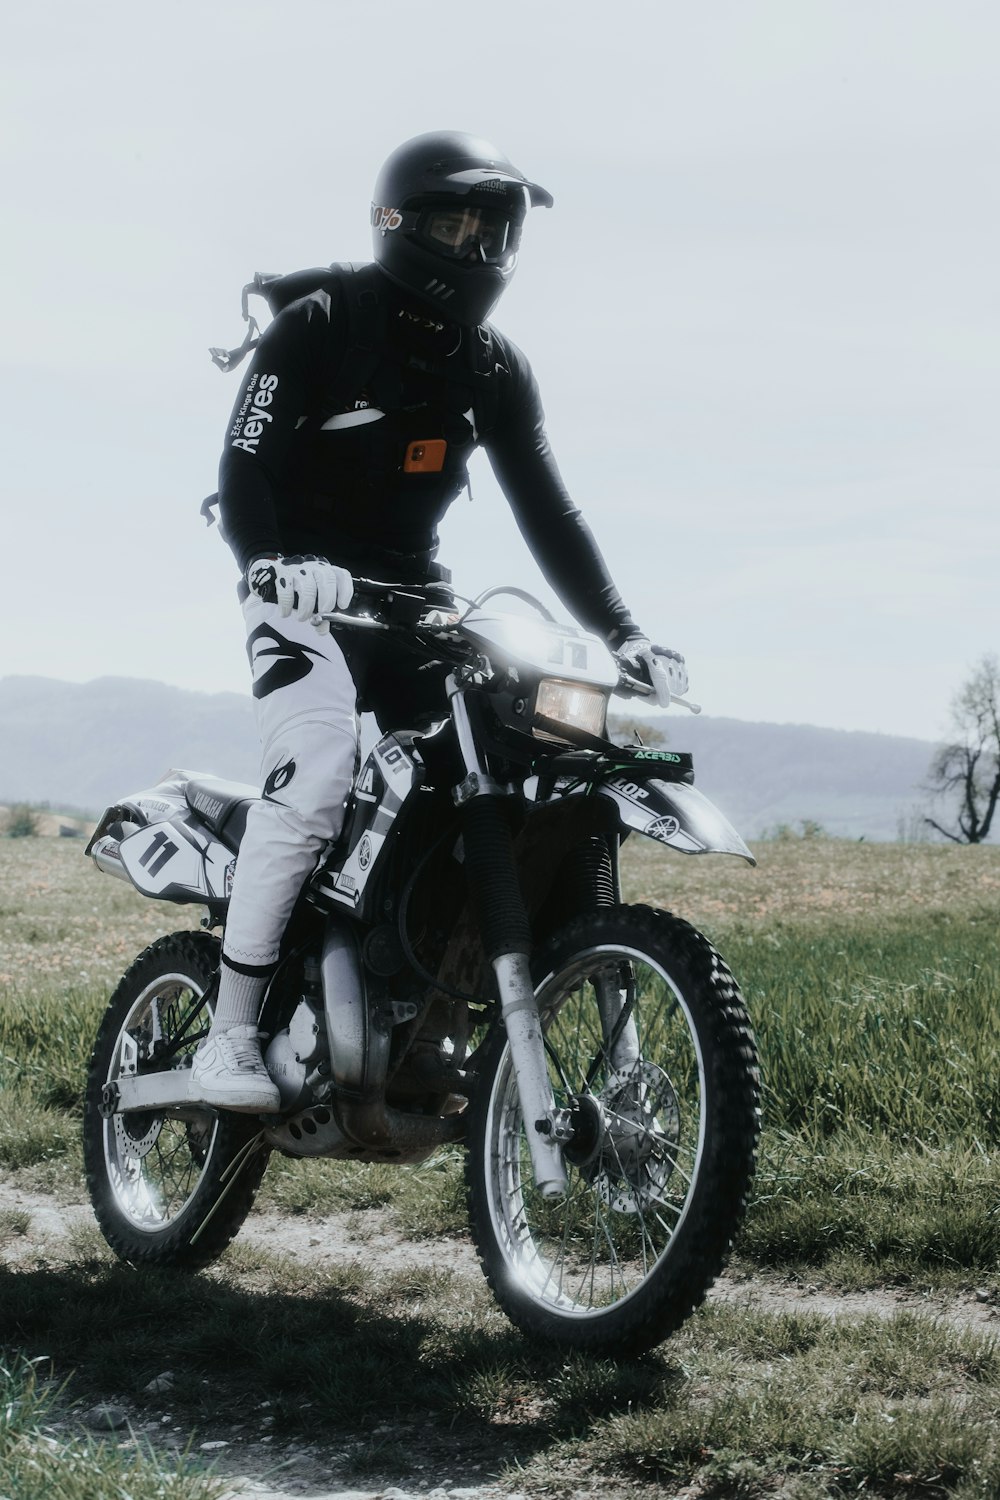 black and white motorcycle on green grass field during daytime